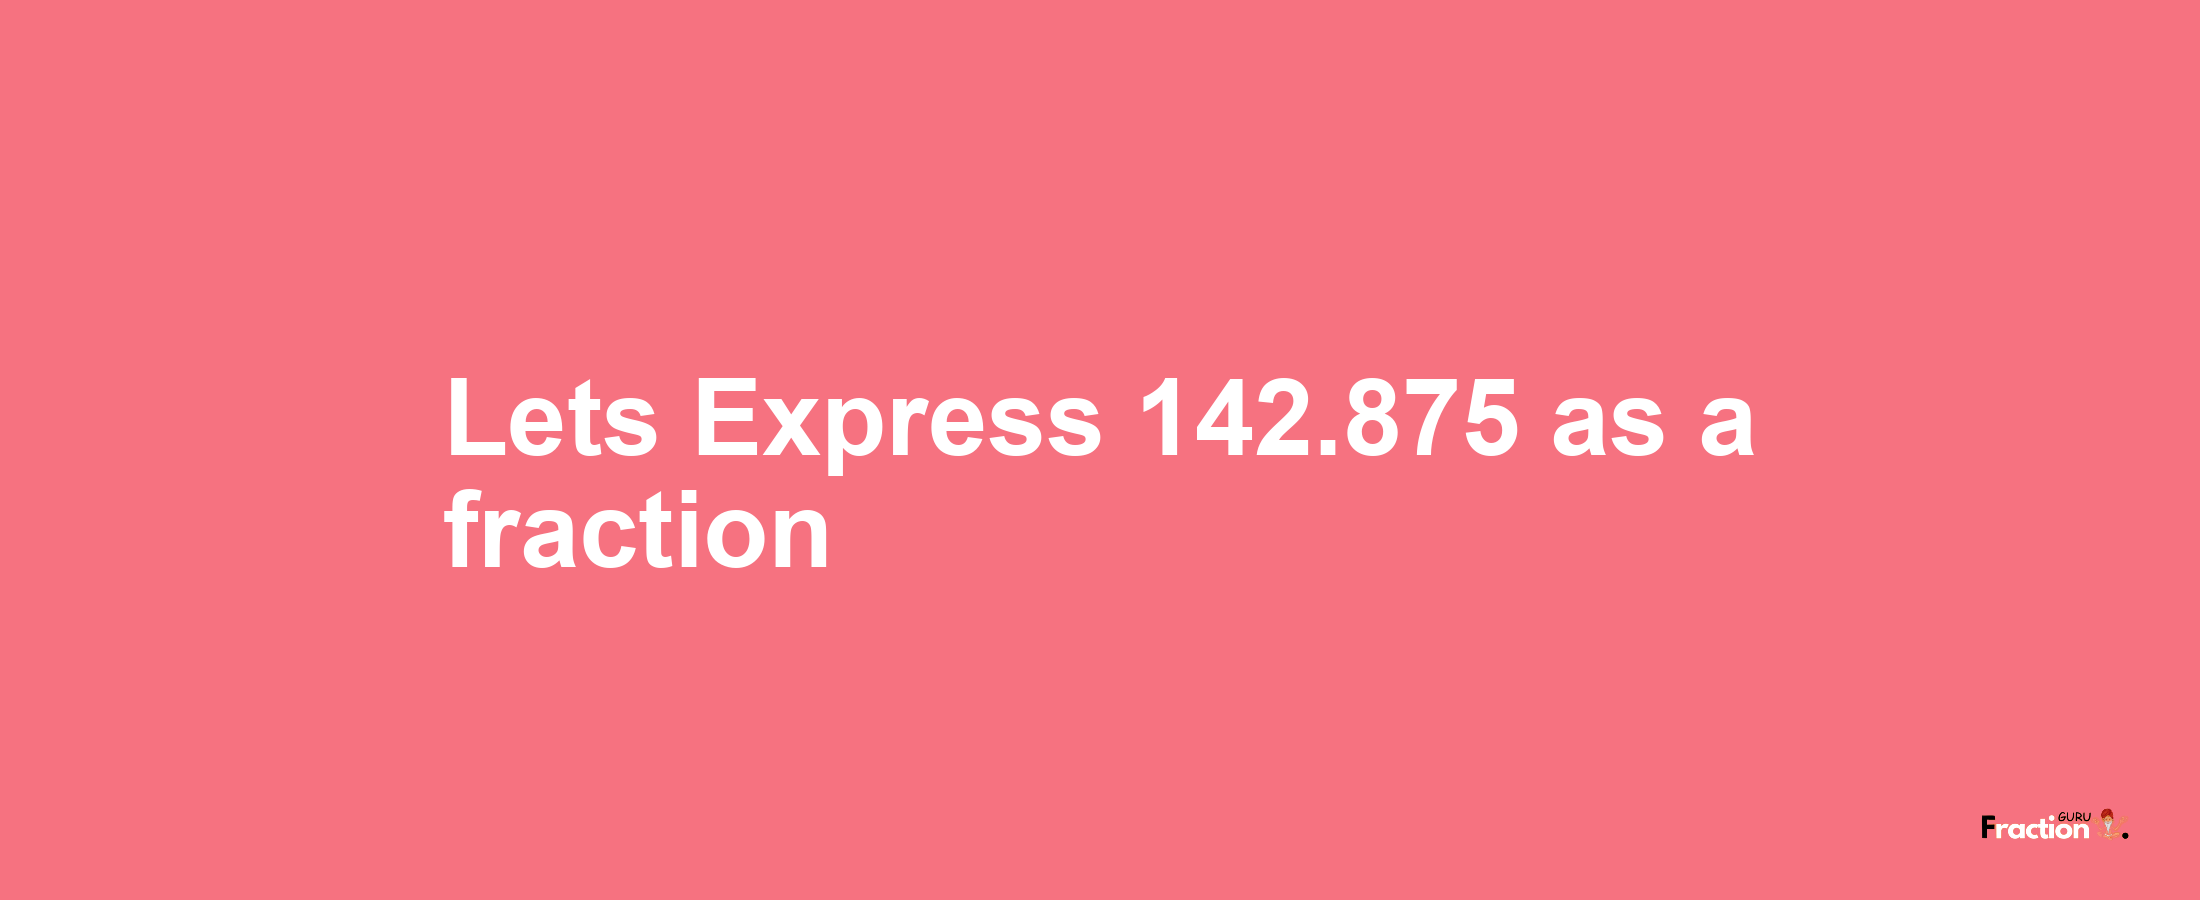 Lets Express 142.875 as afraction